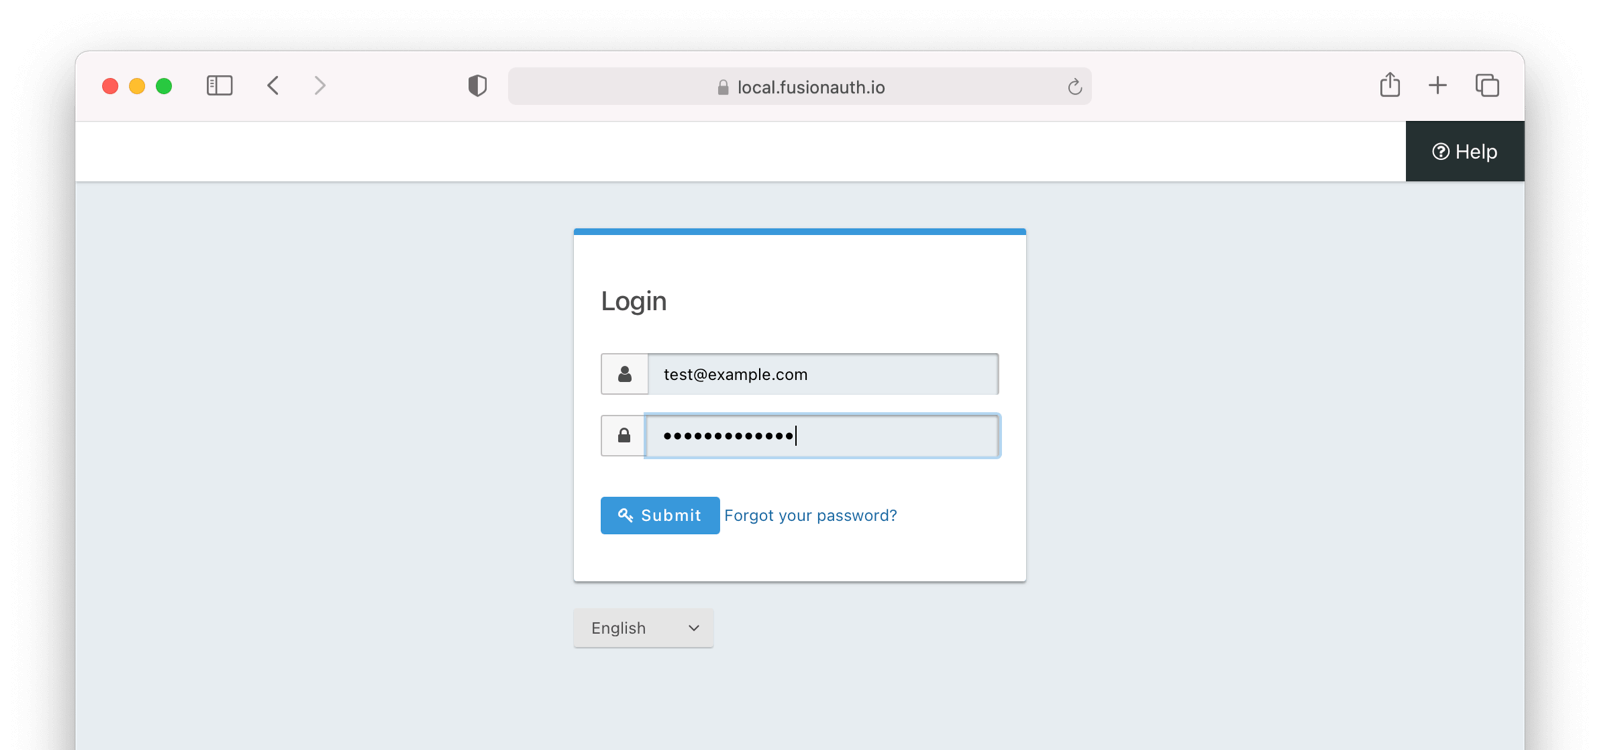 The login page.